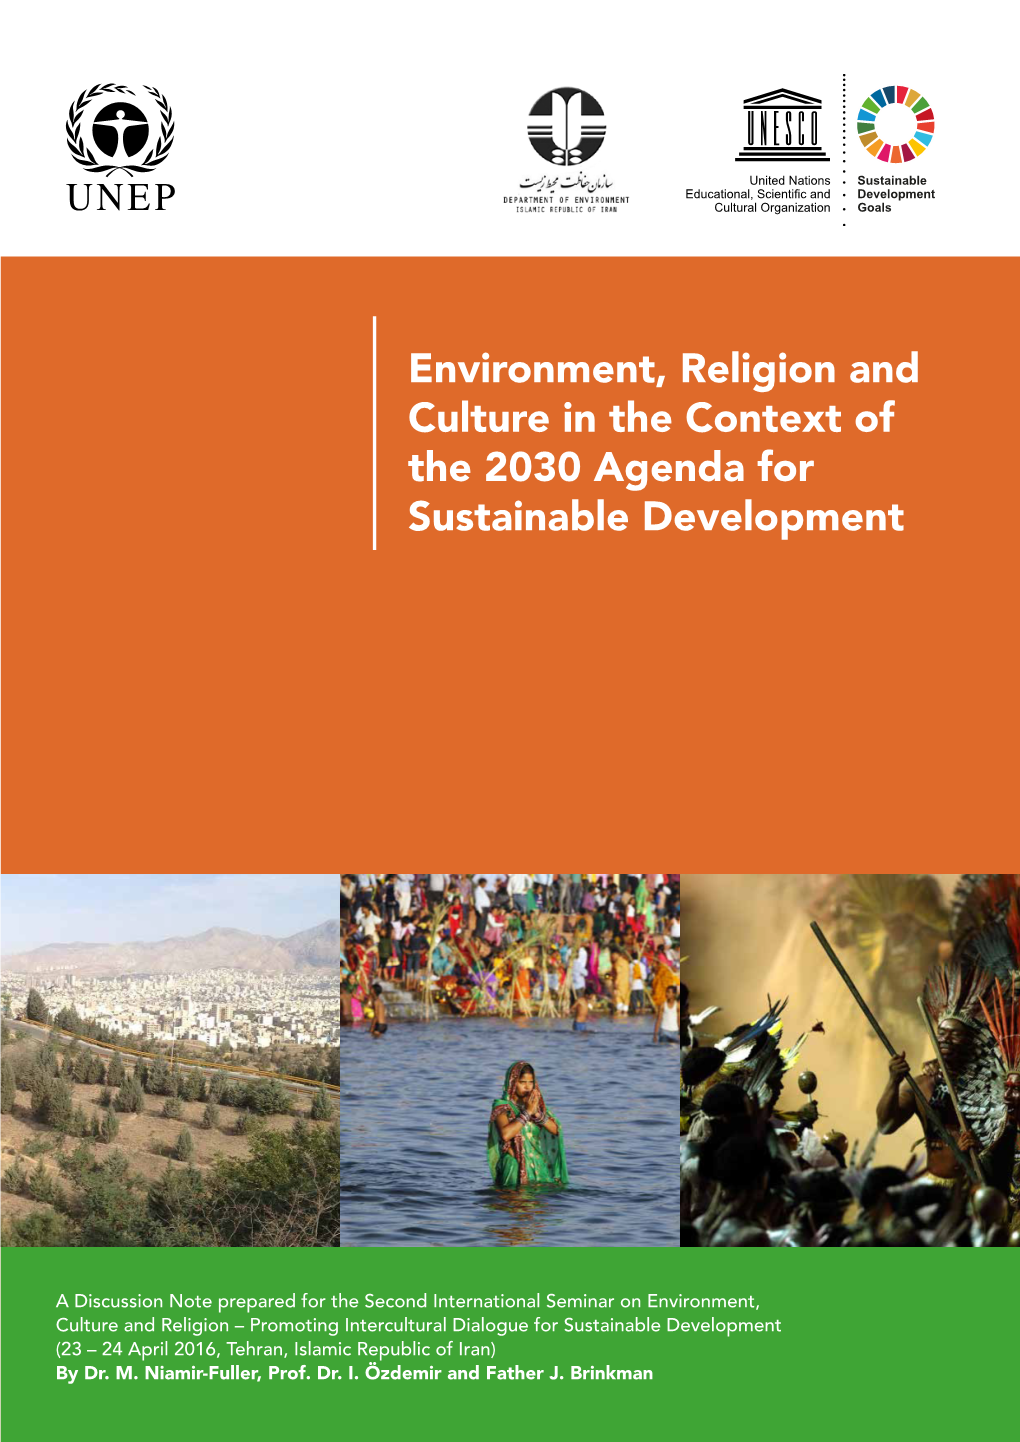 Environment, Religion and Culture in the Context of the 2030 Agenda for Sustainable Development